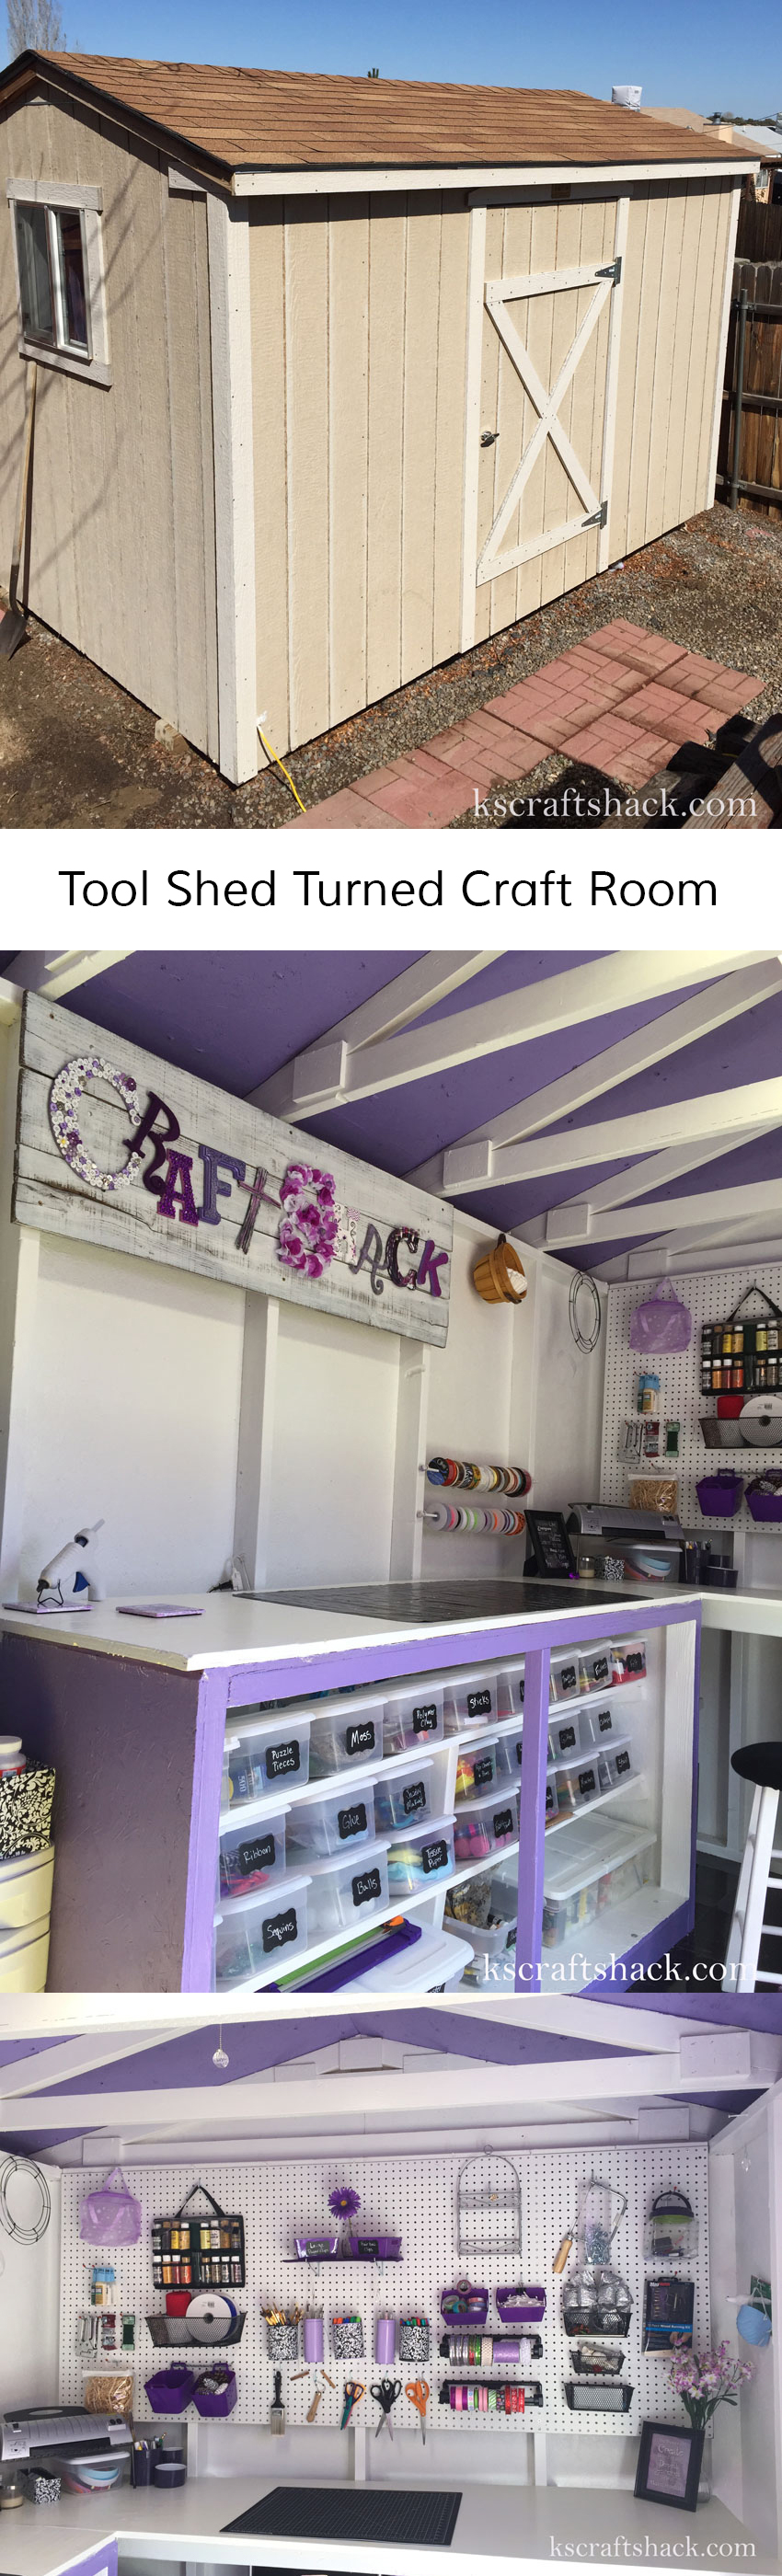 Tool Shed Turned Craft Room || Great way to have a craft room when there's no room in the house.